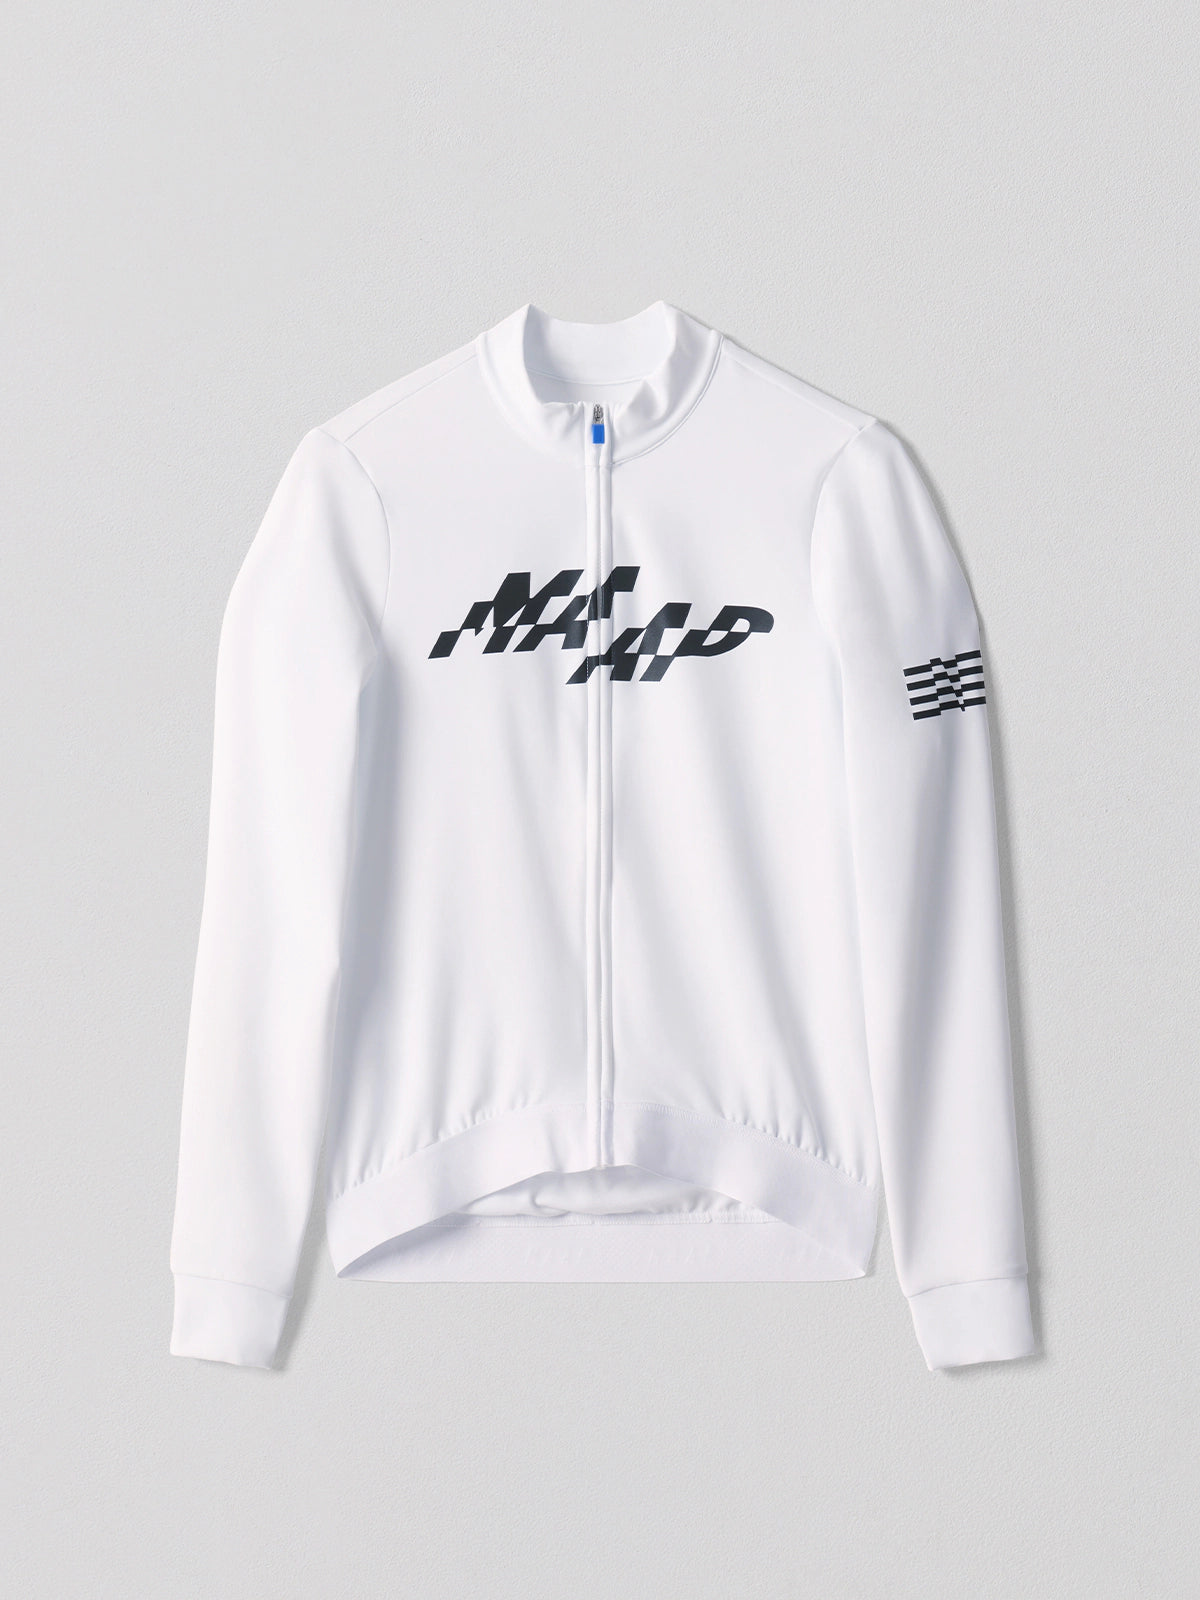 MAAP Women&#39;s Fragment Thermal LS Jersey 2.0 White レディース長袖サイクルジャージ | CYCLISM